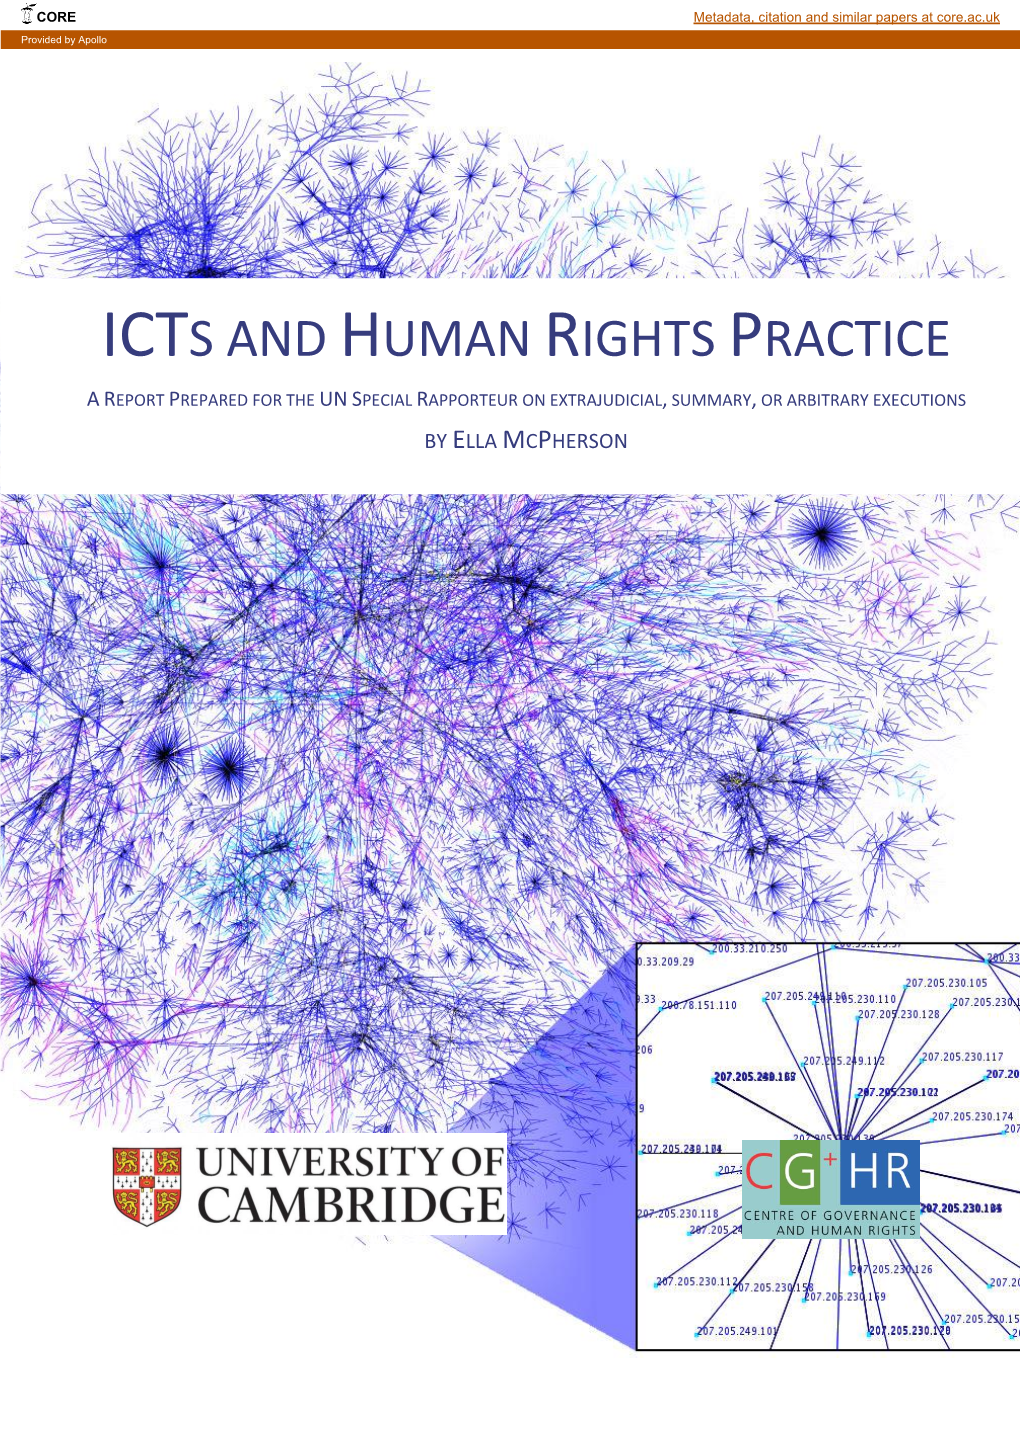 Icts and Human Rights Practice